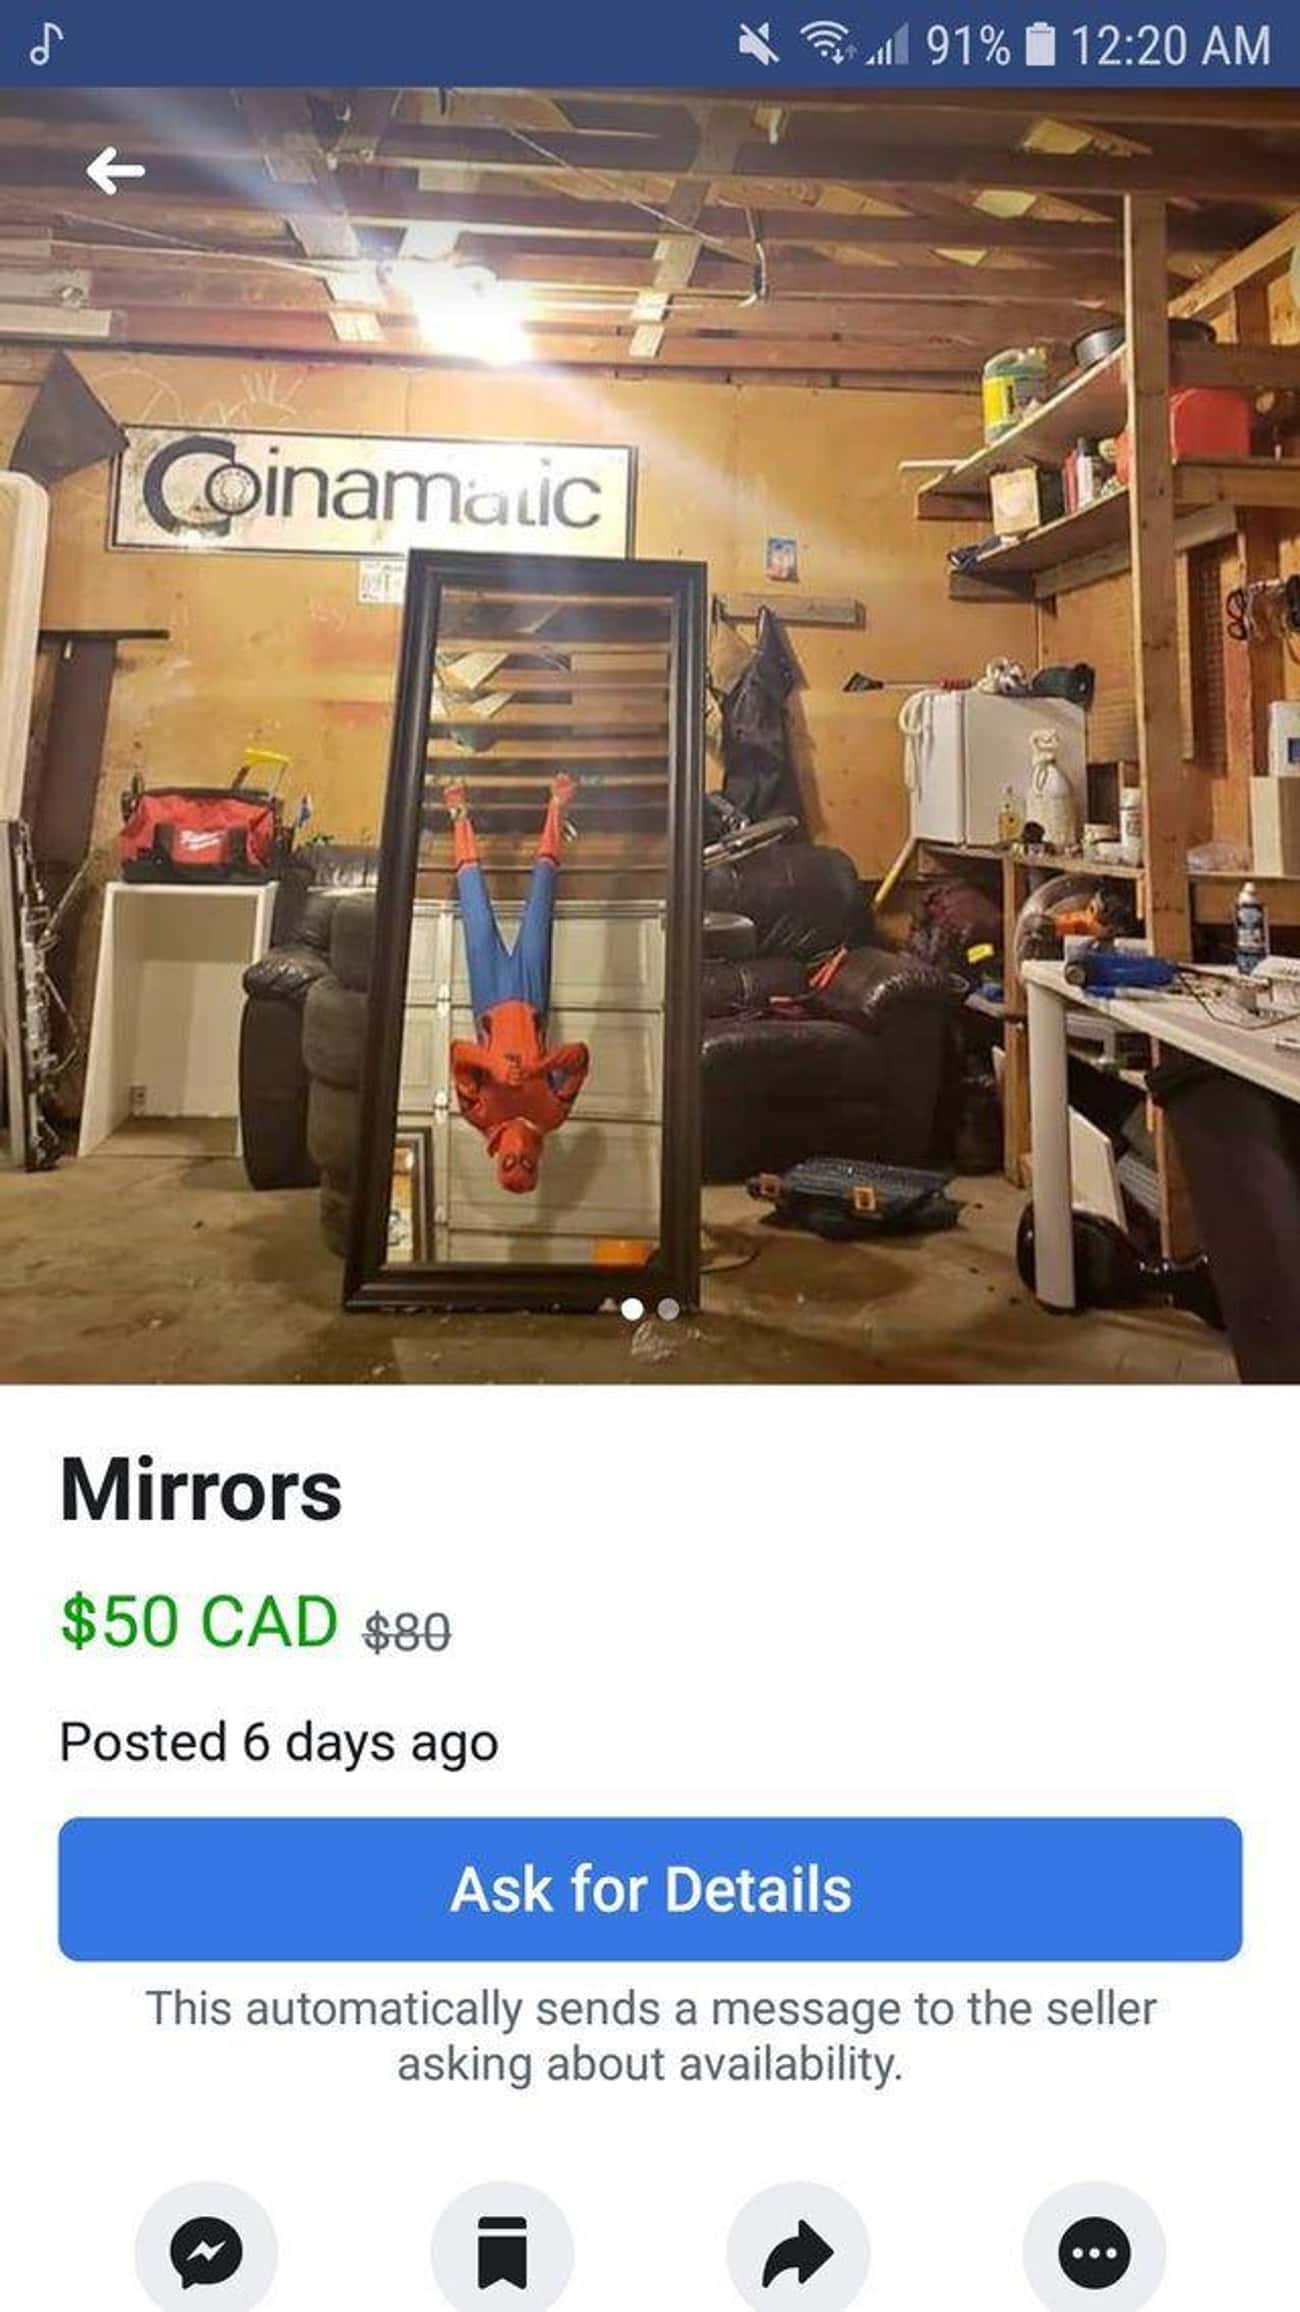 With Great Mirror, Comes Great Responsibility